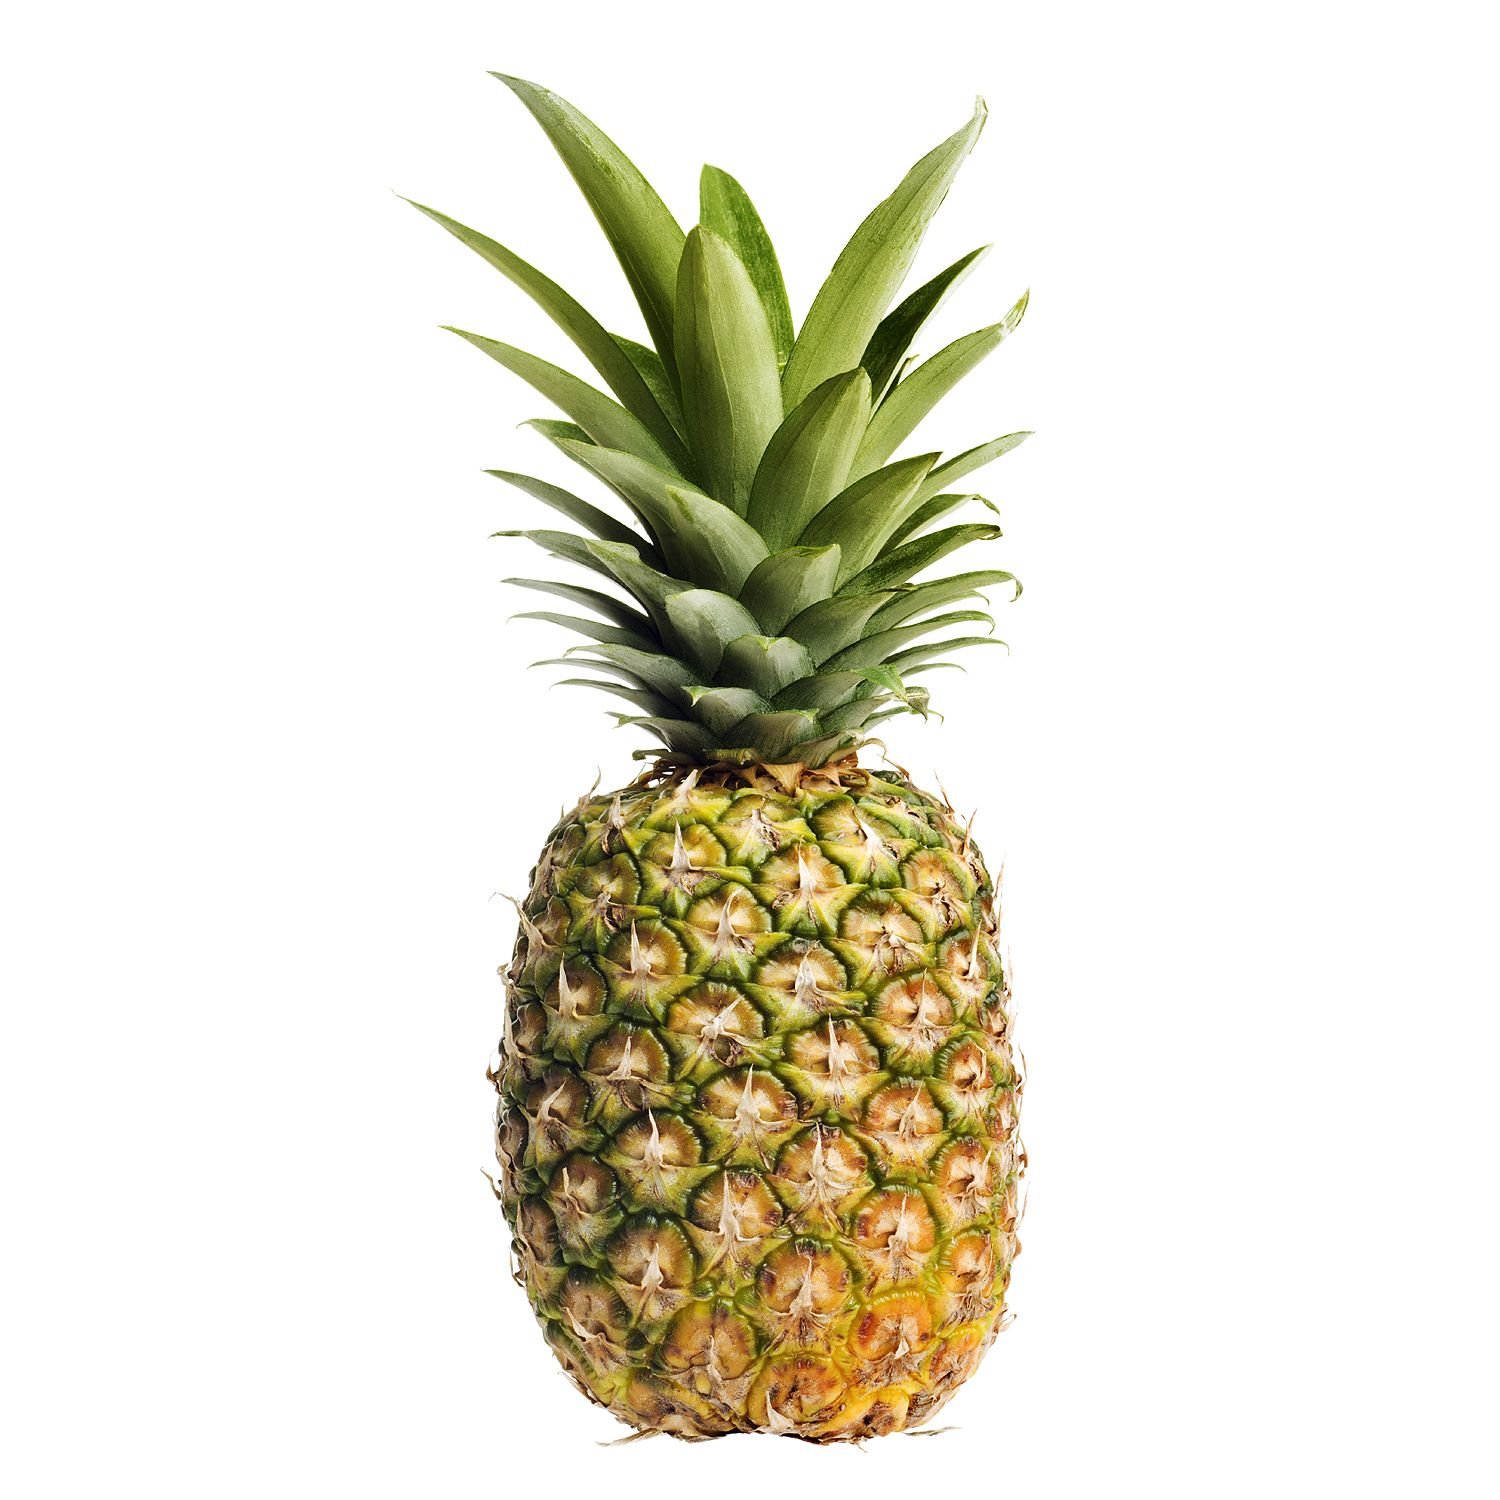 Pinapple Pictures